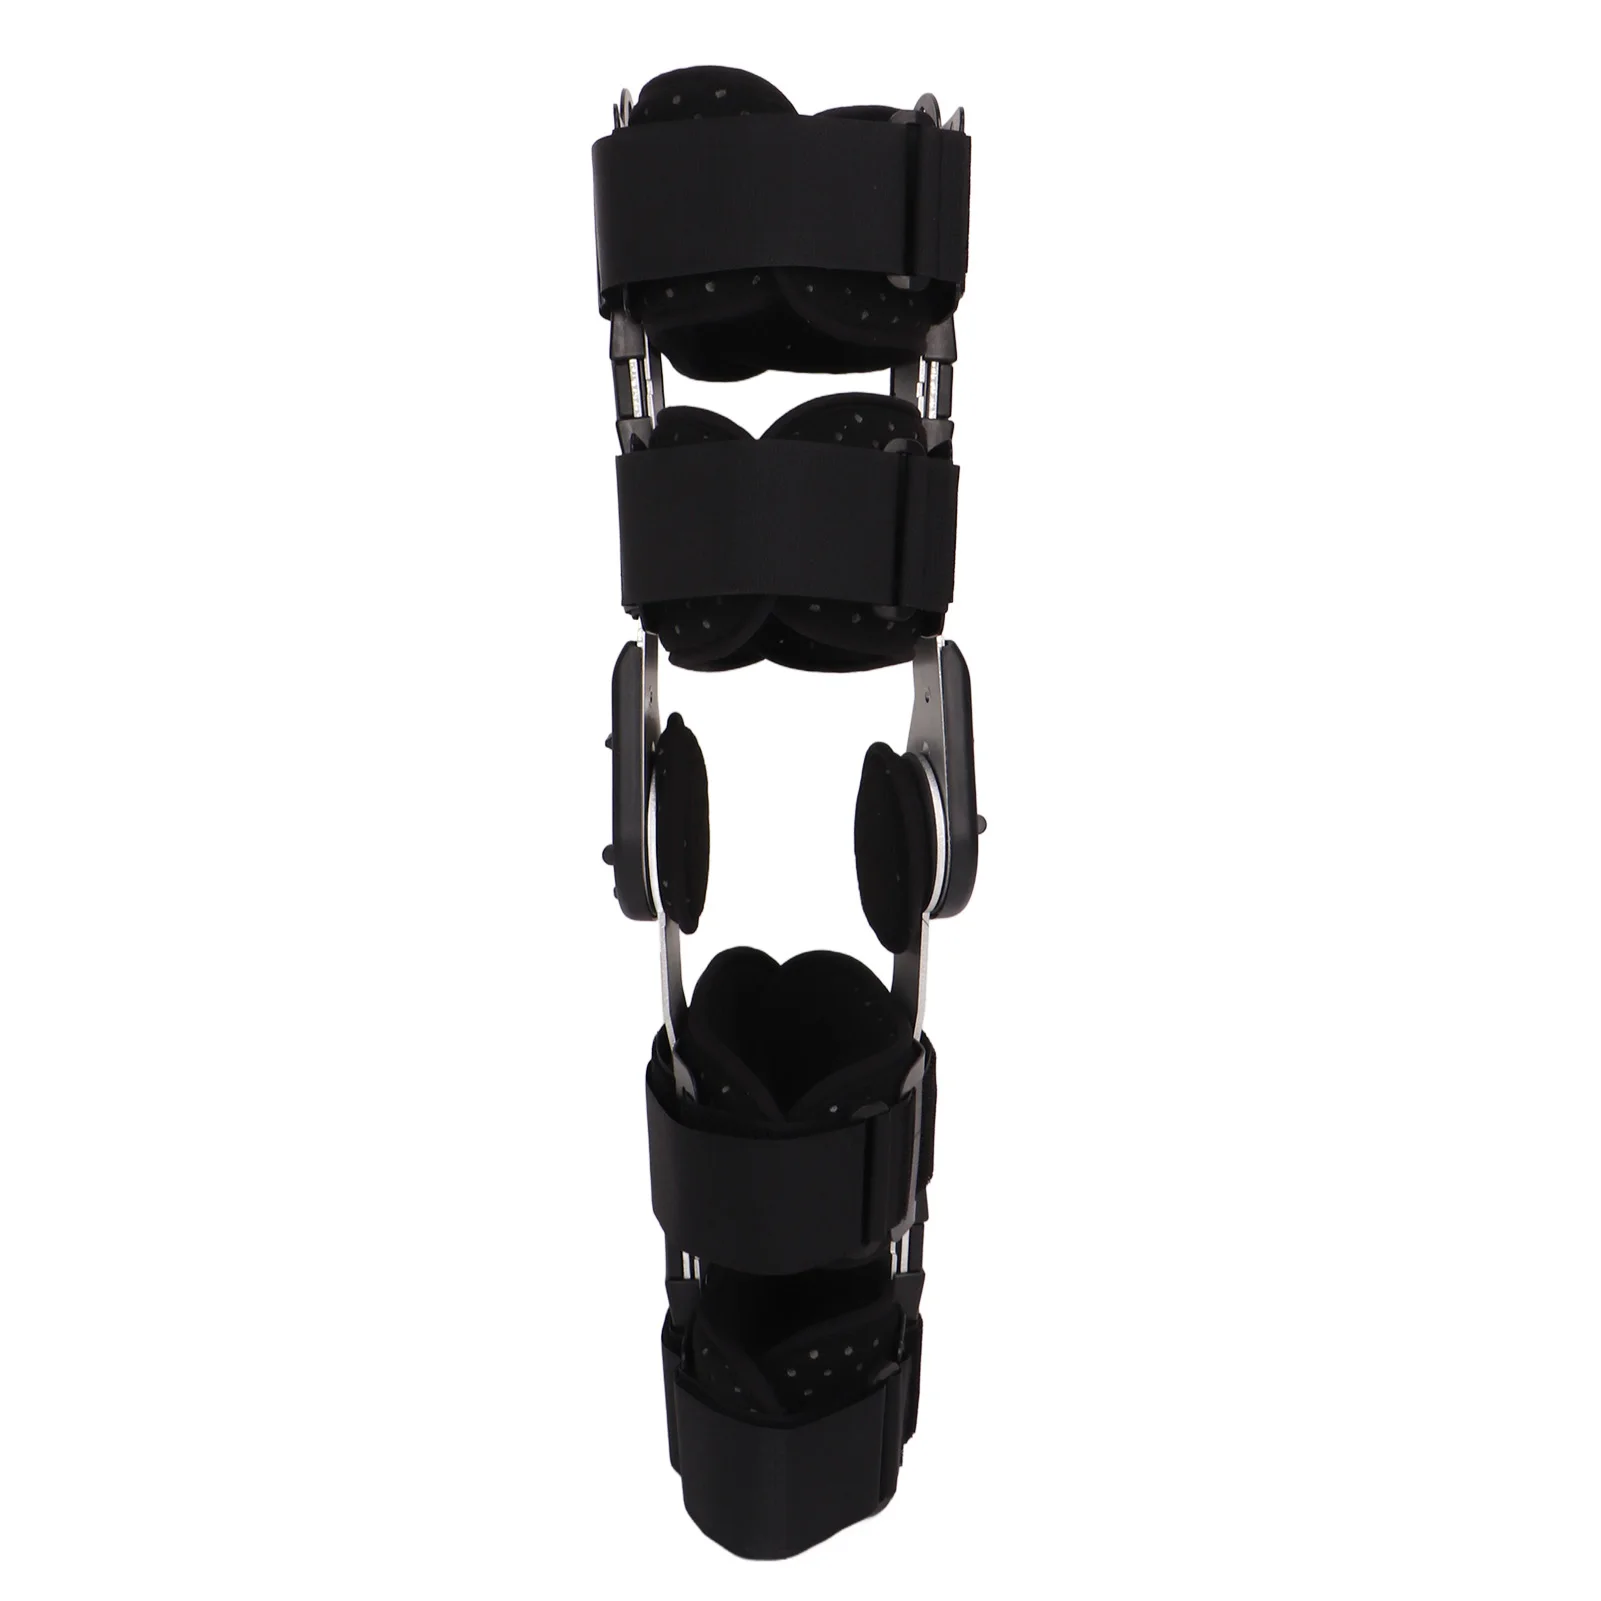 Hinged Knee Brace Immobilizer Orthosis Stabilizer for ACL MCL PCL Injury, Medical Orthopedic Support Stabilizer After Surgery